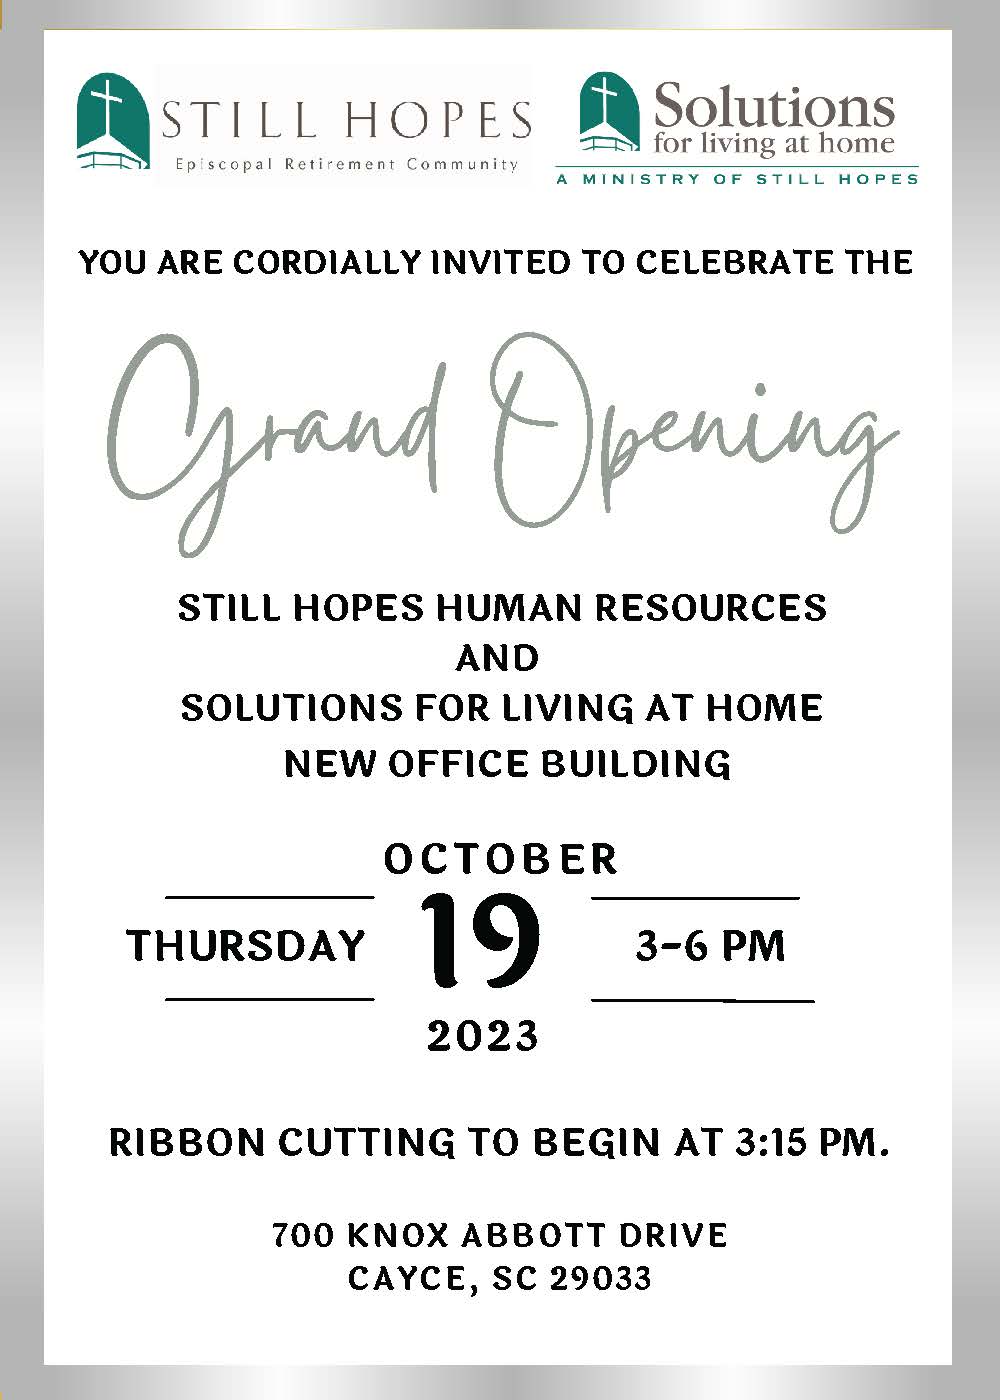 Join us for The Dream Center Houston Ribbon Cutting Ceremony @12PM CST -  The Lighthouse Church